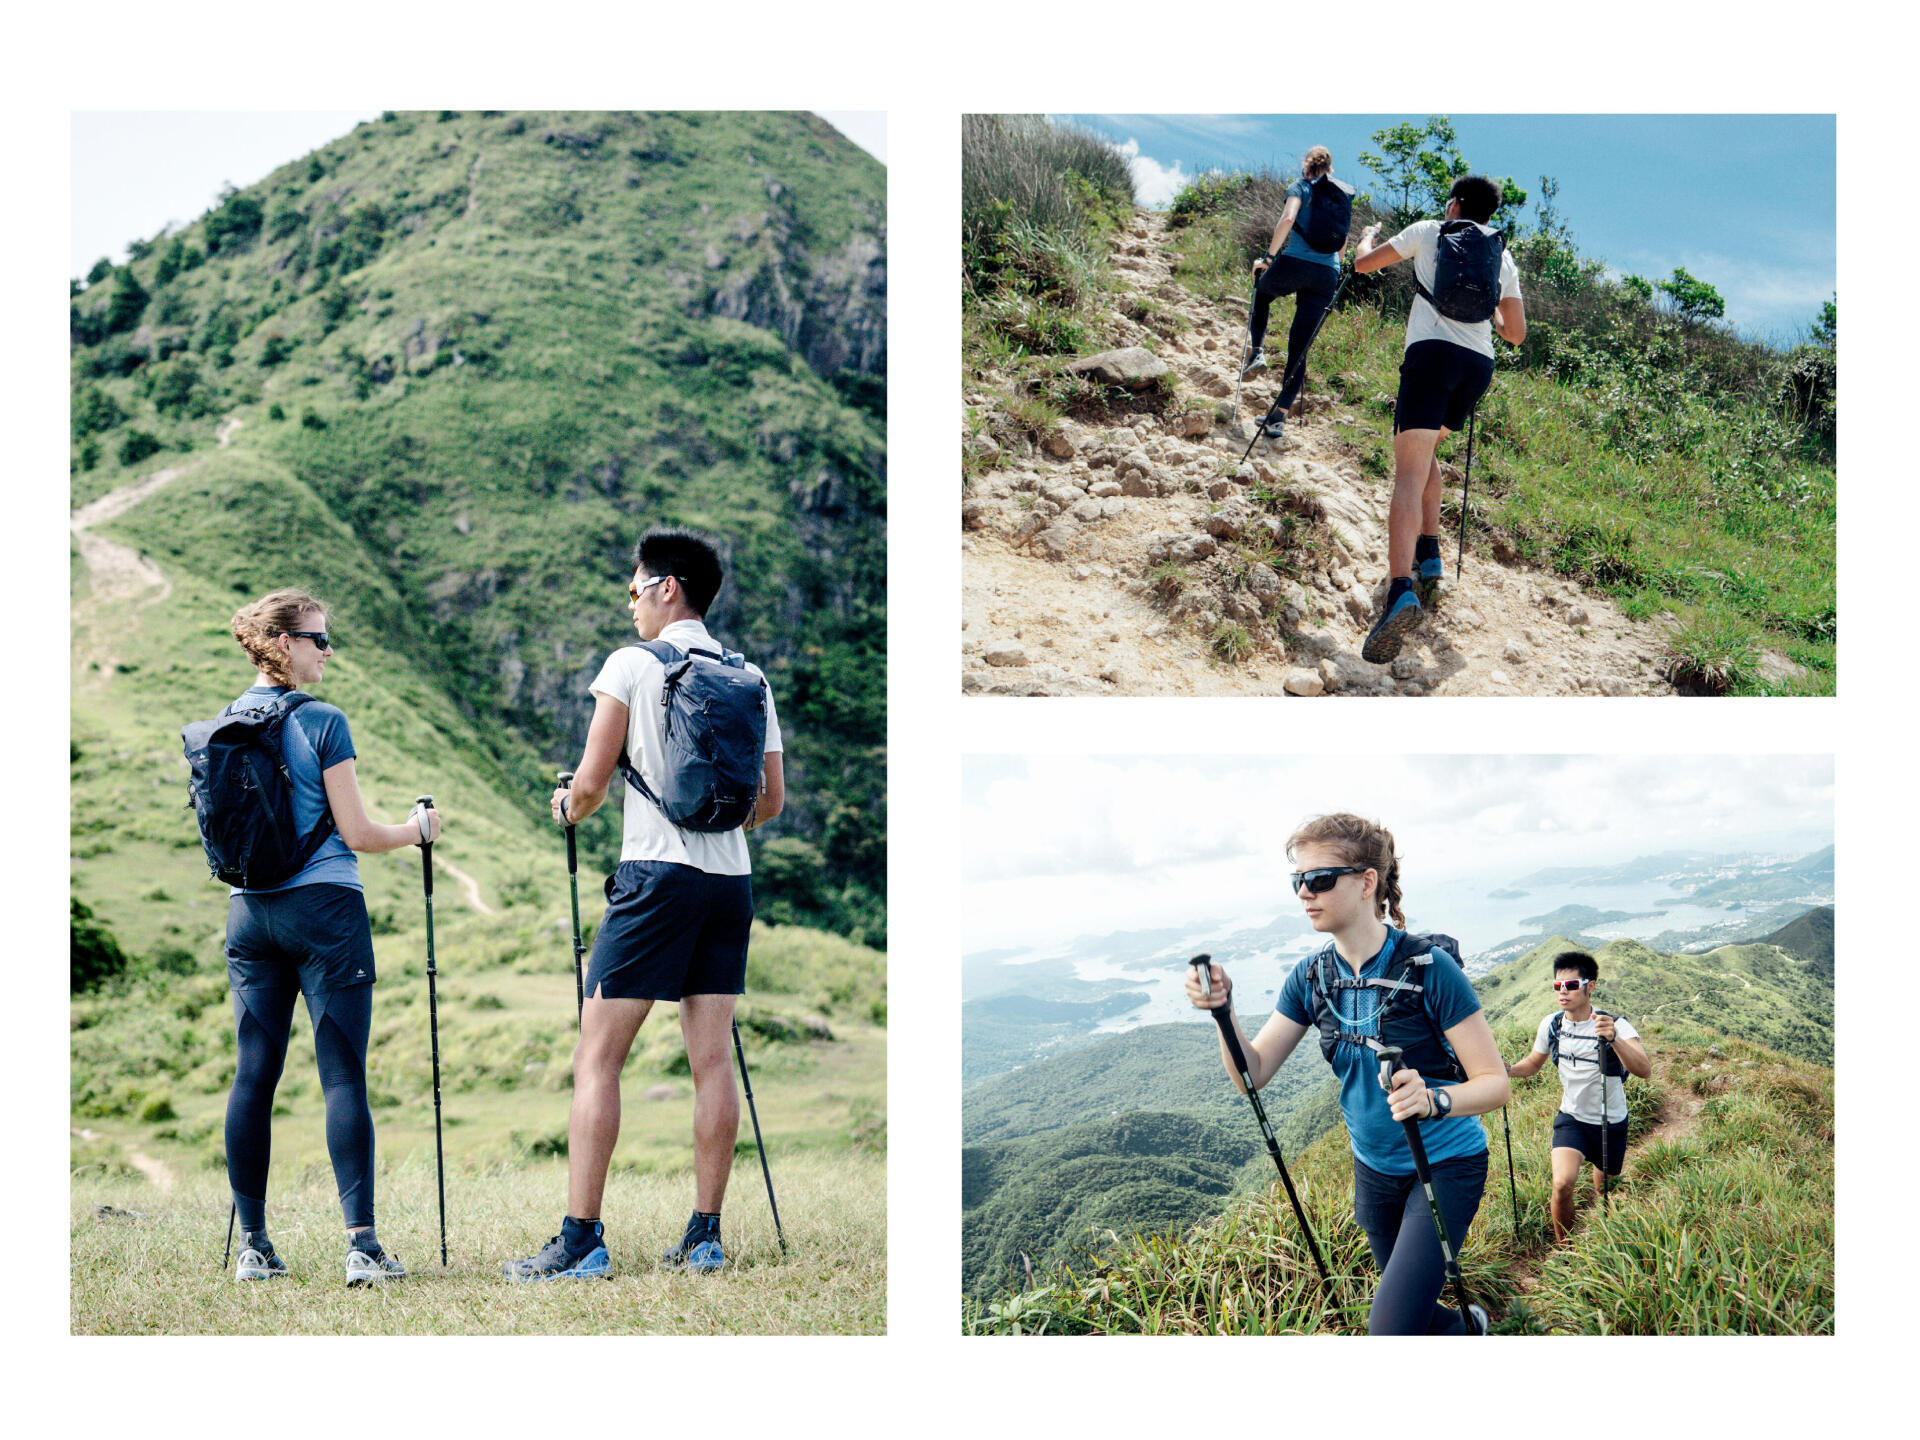 Fast hiking - A new way of hiking in a dynamic and intense pace